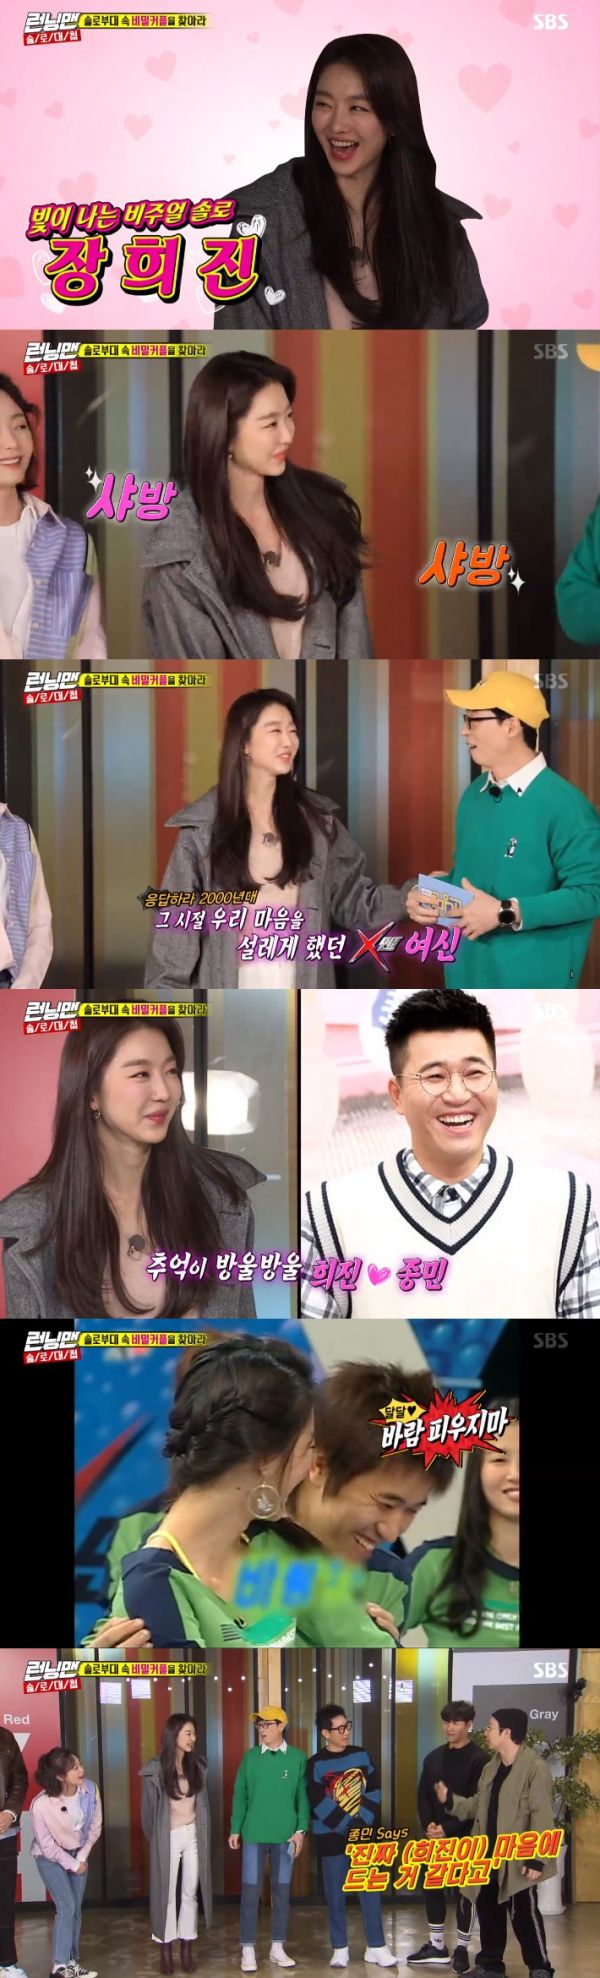 Actor Jang Hee-jin reunited with X-Men members for a long time in Running Man.Actor Jang Hee-jin Kim Jae-young and group space girl Bona appeared as guests on the SBS entertainment program Running Man broadcasted on the 31st and challenged to find secret couples in solo units.When Jang Hee-jin appeared as the first guest on the day, Yoo Jae-Suk and Kim Jong-guk Haha laughed at the pleasure. Yoo Jae-Suk said, Hee-jin has been a long time since X-Men.Jang Hee-jin said, I do not know people these days. Yoo Jae-Suk said, These are people who grew up watching X-Man.Haha recalled the memories, saying, It was a love line with Jongmin at that time. He said, Jongmin said he really liked Heejin behind the stage.